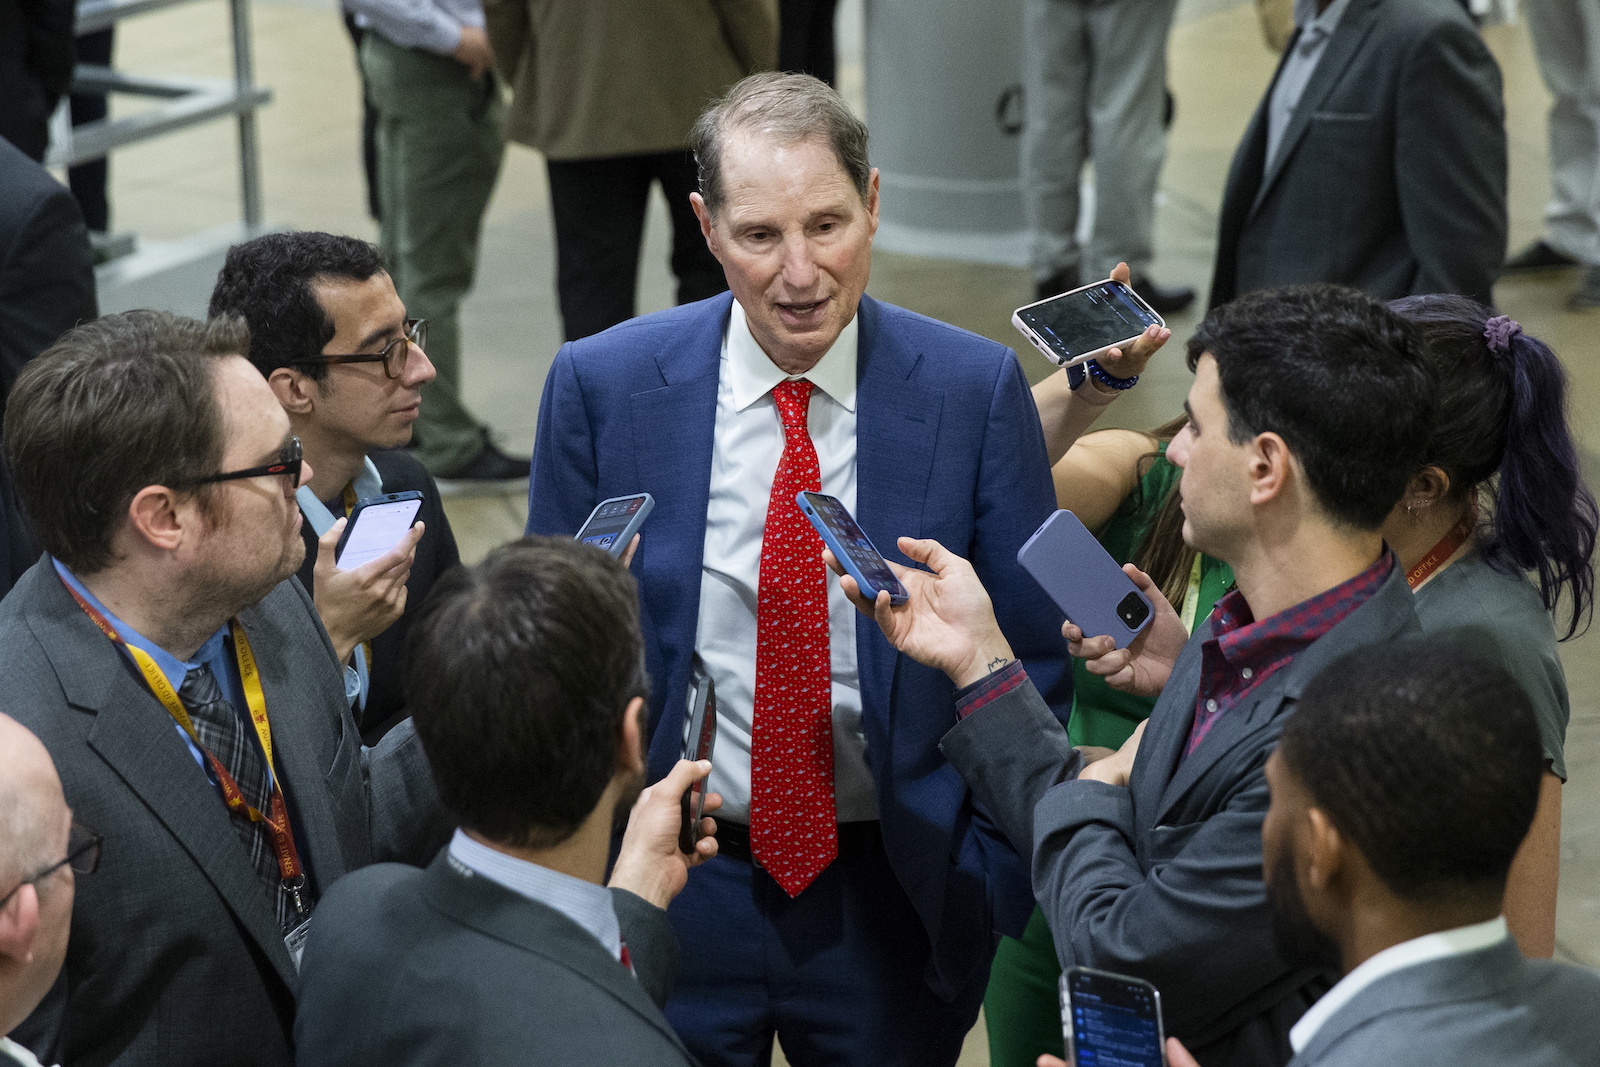 epa10667512 US Democratic Senator of Oregon, Ron Wyden, (C) speaks to members of the media near the Senate subway during Senate voting on Capitol Hill in Washington, DC, USA, 01 June 2023. Bipartisan legislation to raise the debt ceiling and avert a default has passed the House of Representatives but must pass the Senate to land on President Biden's desk for signing.  EPA/MICHAEL REYNOLDS